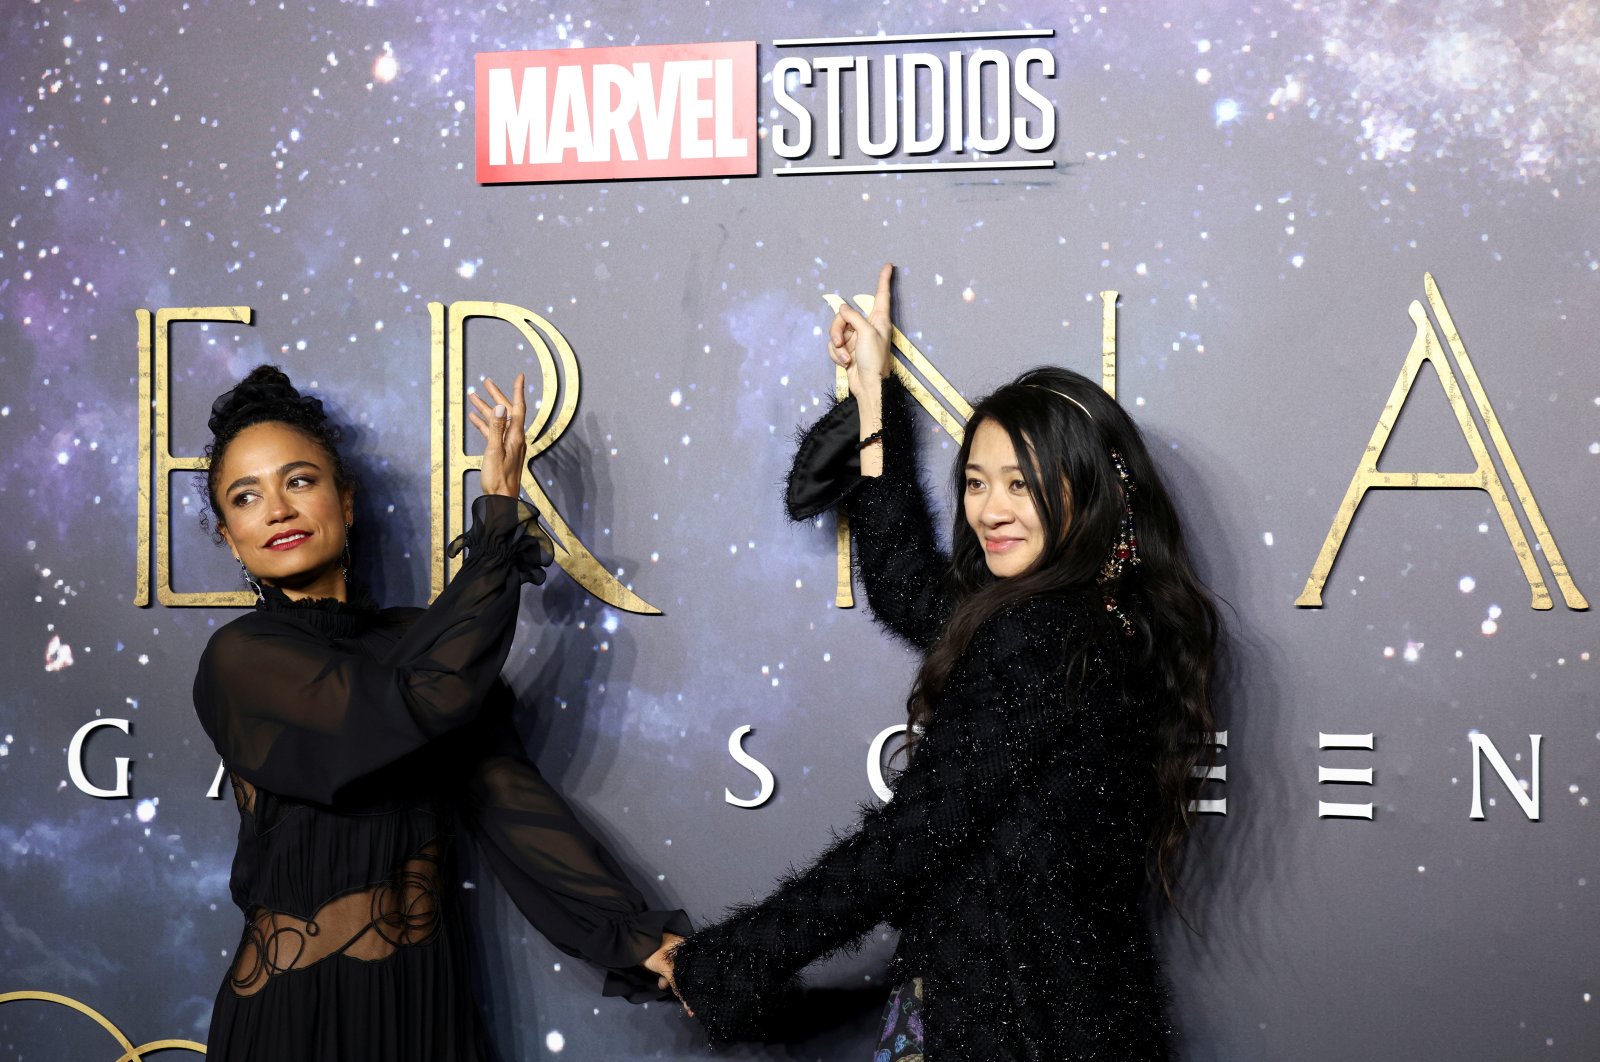 Director Chloe Zhao (R) and cast member Lauren Ridloff pose as they arrive for a screening of the film "Eternals" in London, U.K., Oct. 27, 2021. (Reuters Photo)